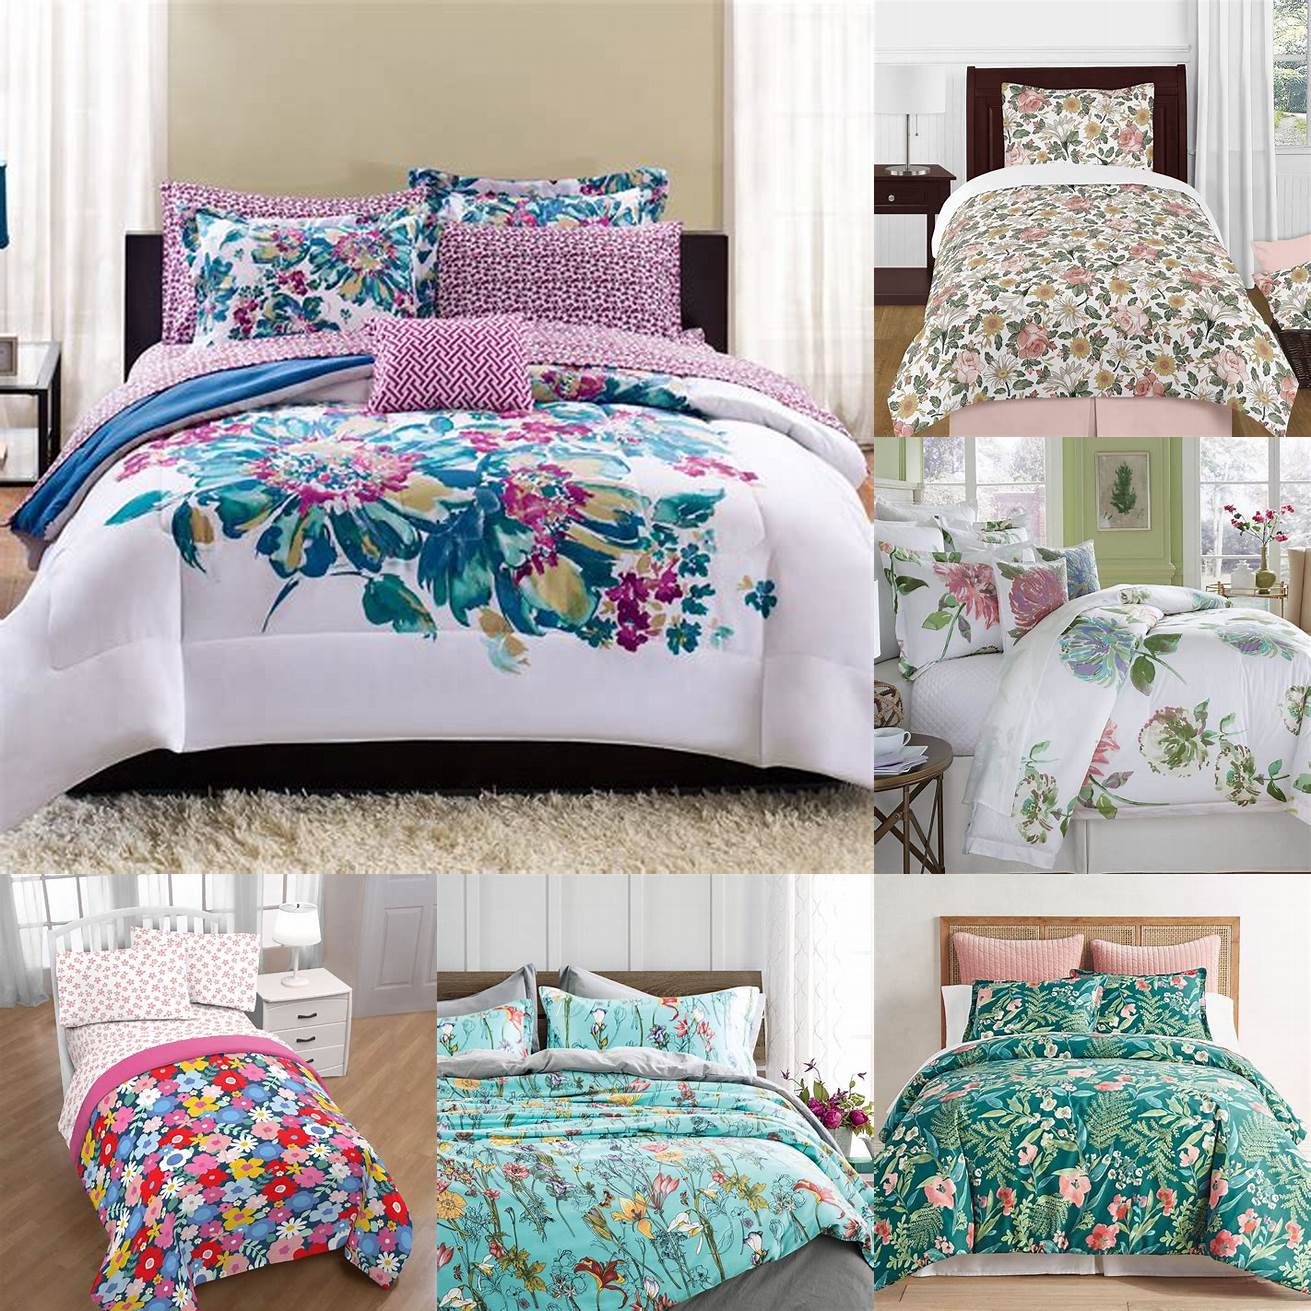 Cool and colorful floral bedding set